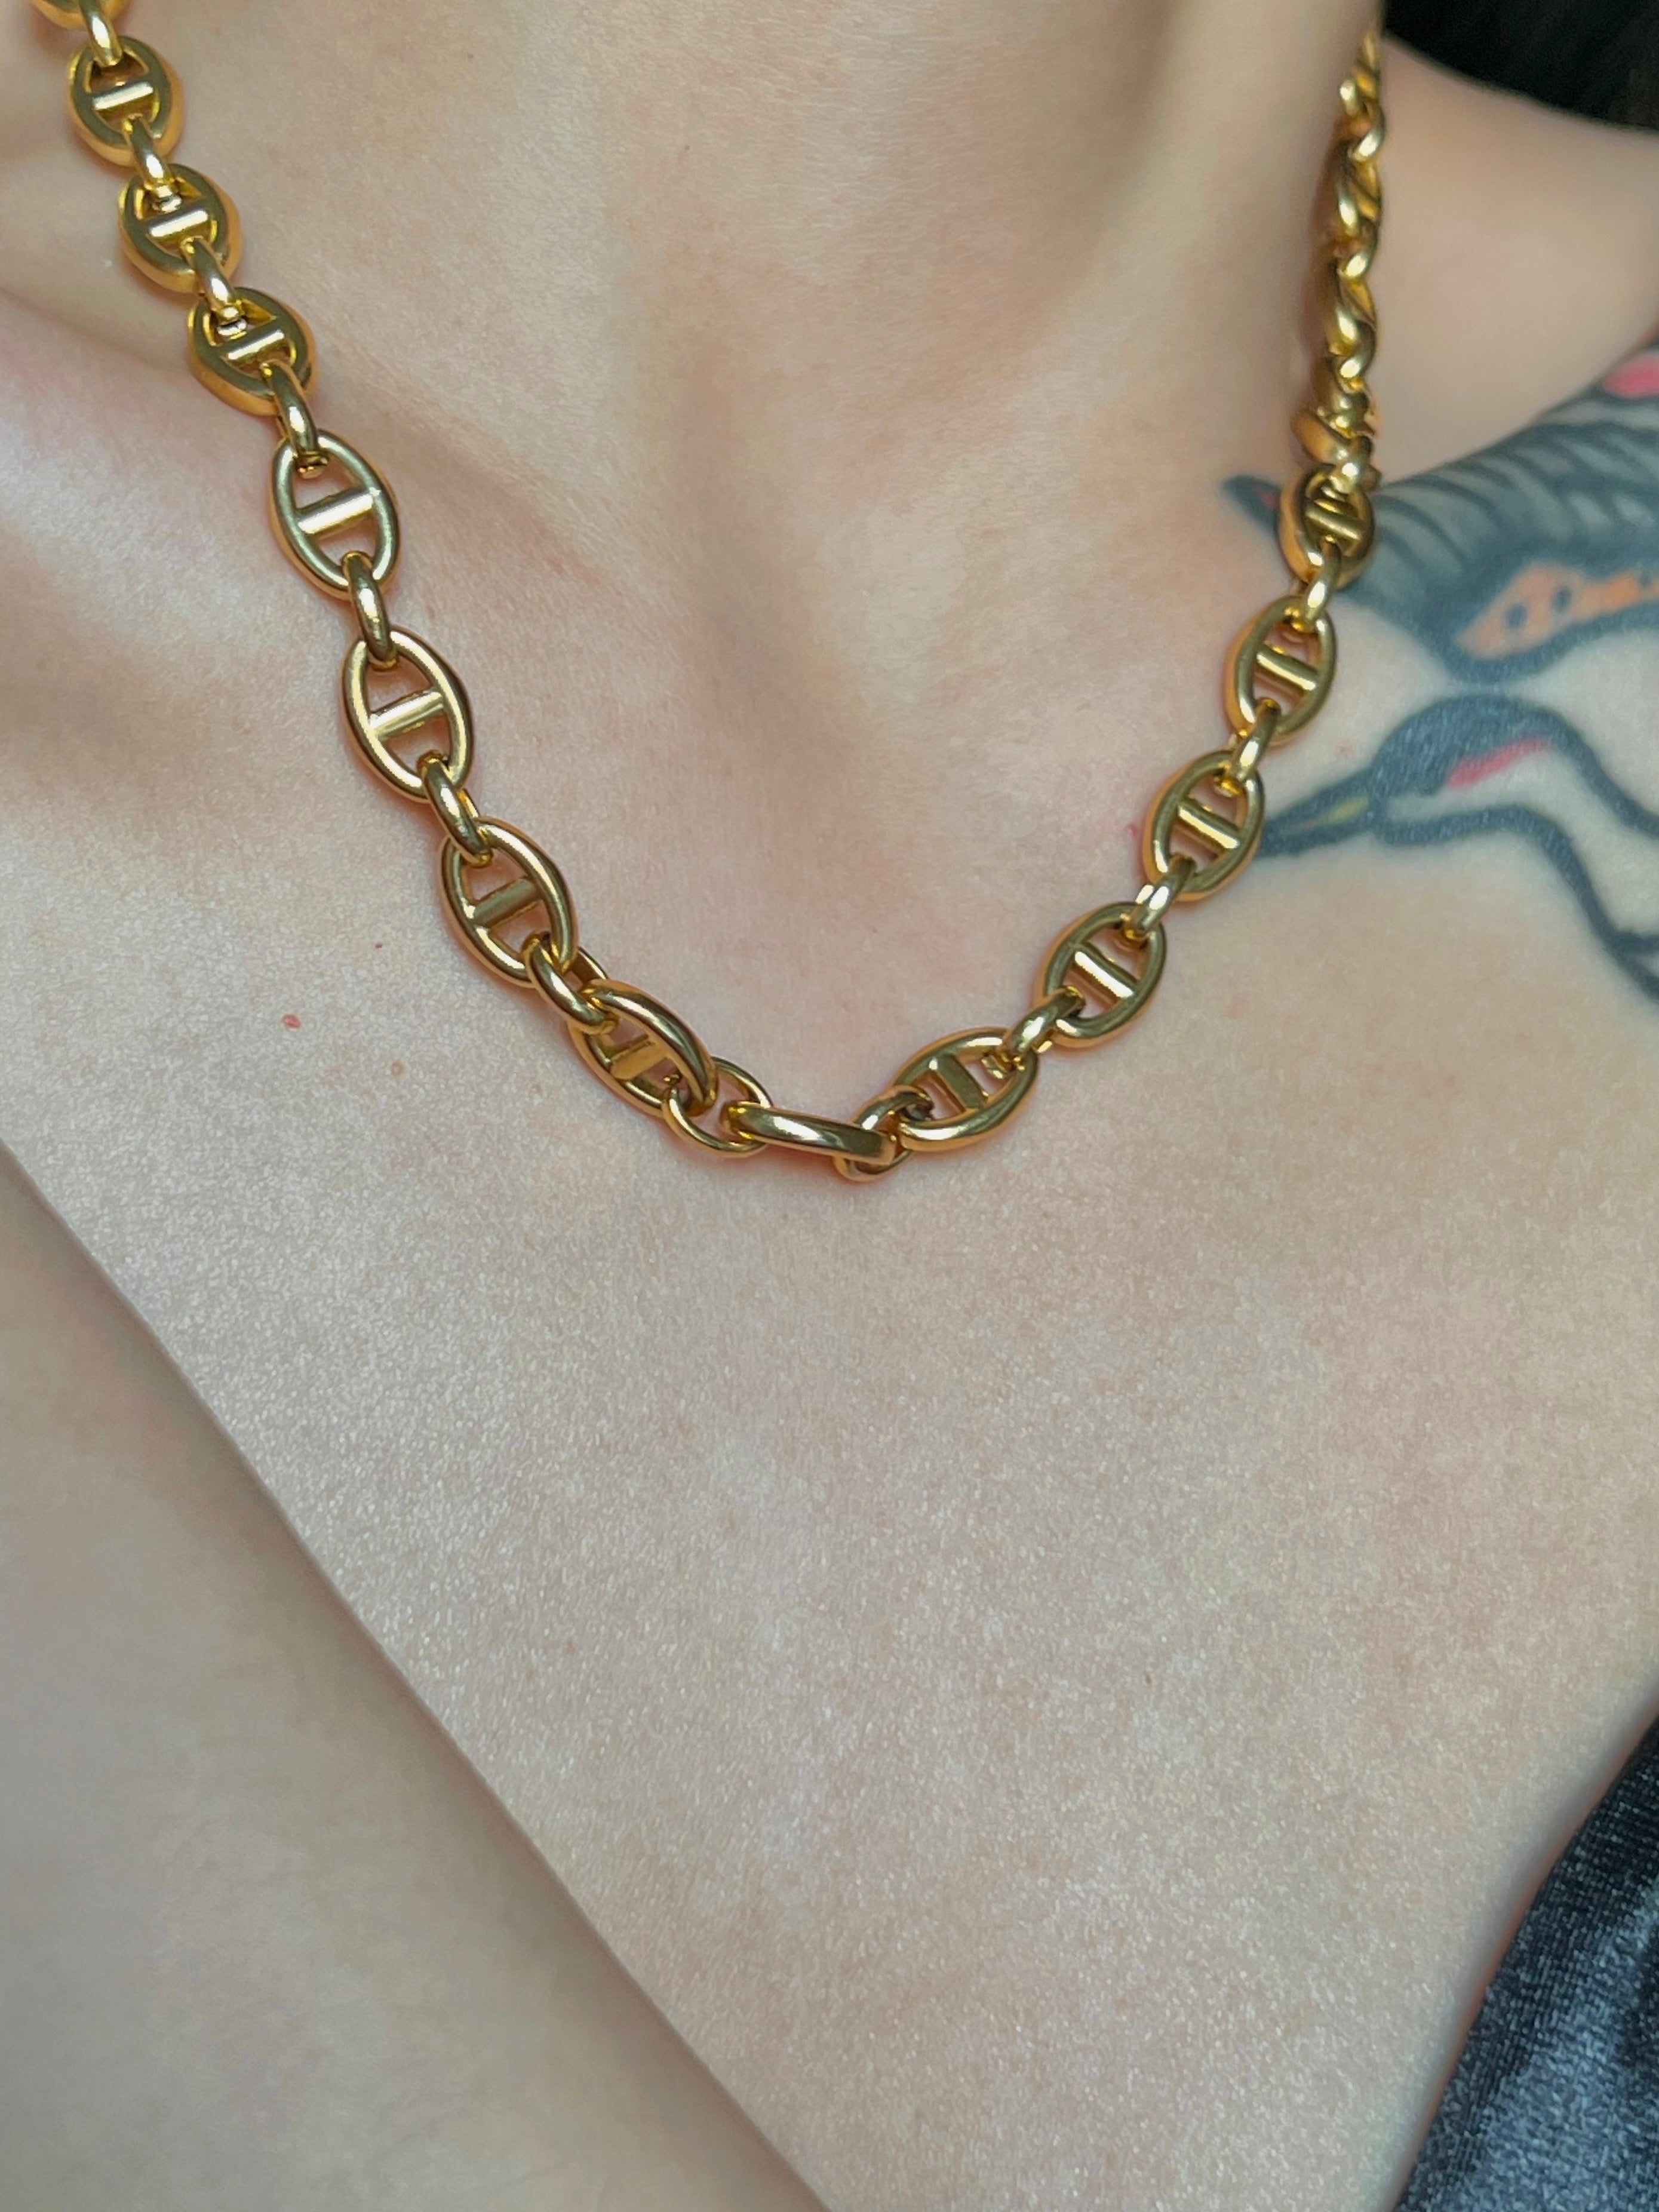 Penelope Chunky Coffee Bean Linked Chain Necklace & Bracelet 18K Gold/Silver